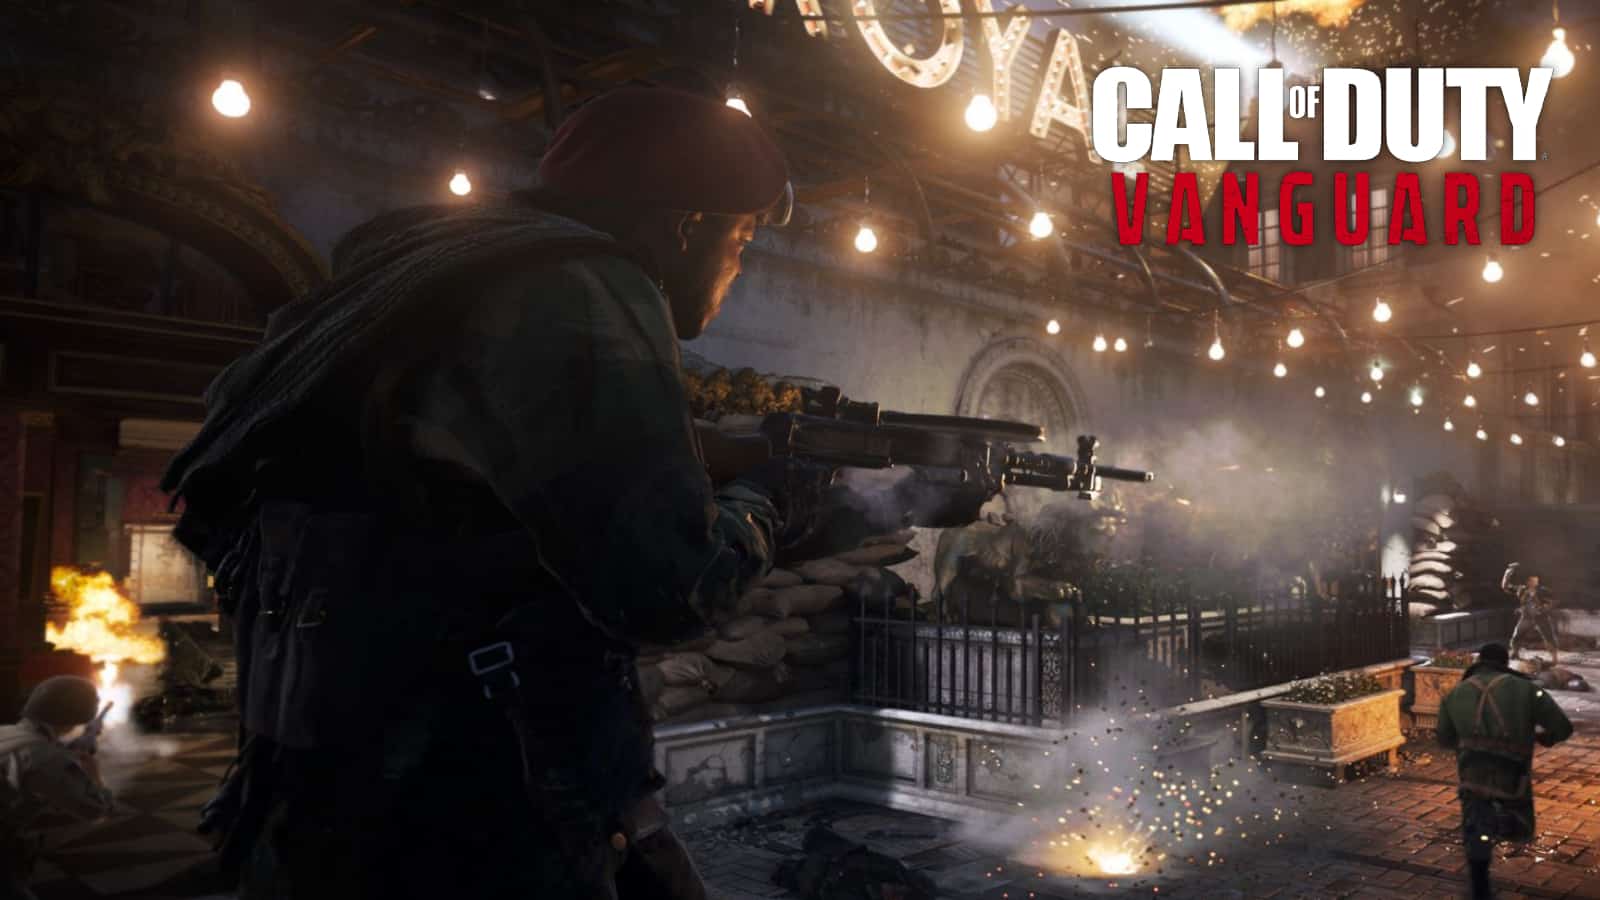 Absurd CoD Vanguard clip makes players demand fix for "wack" spawn system